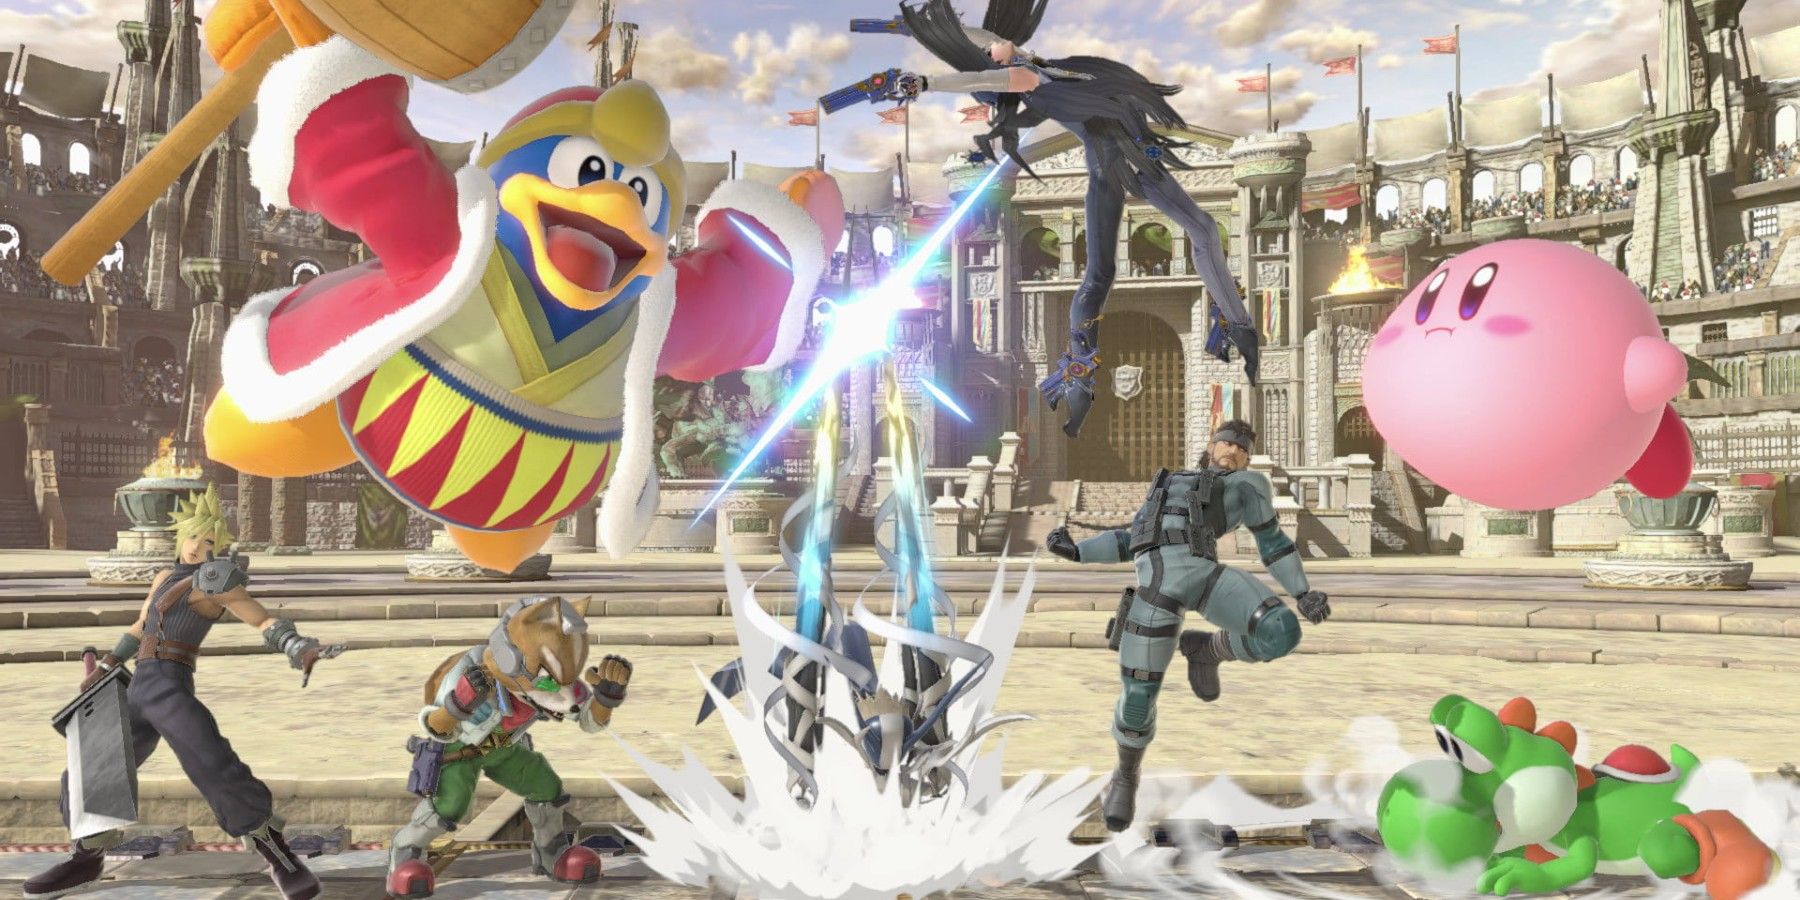 Dentist-Offers-Free-Cleanings-to-Those-That-Can-Beat-Him-in-Super-Smash-Bros-Ultimate-1